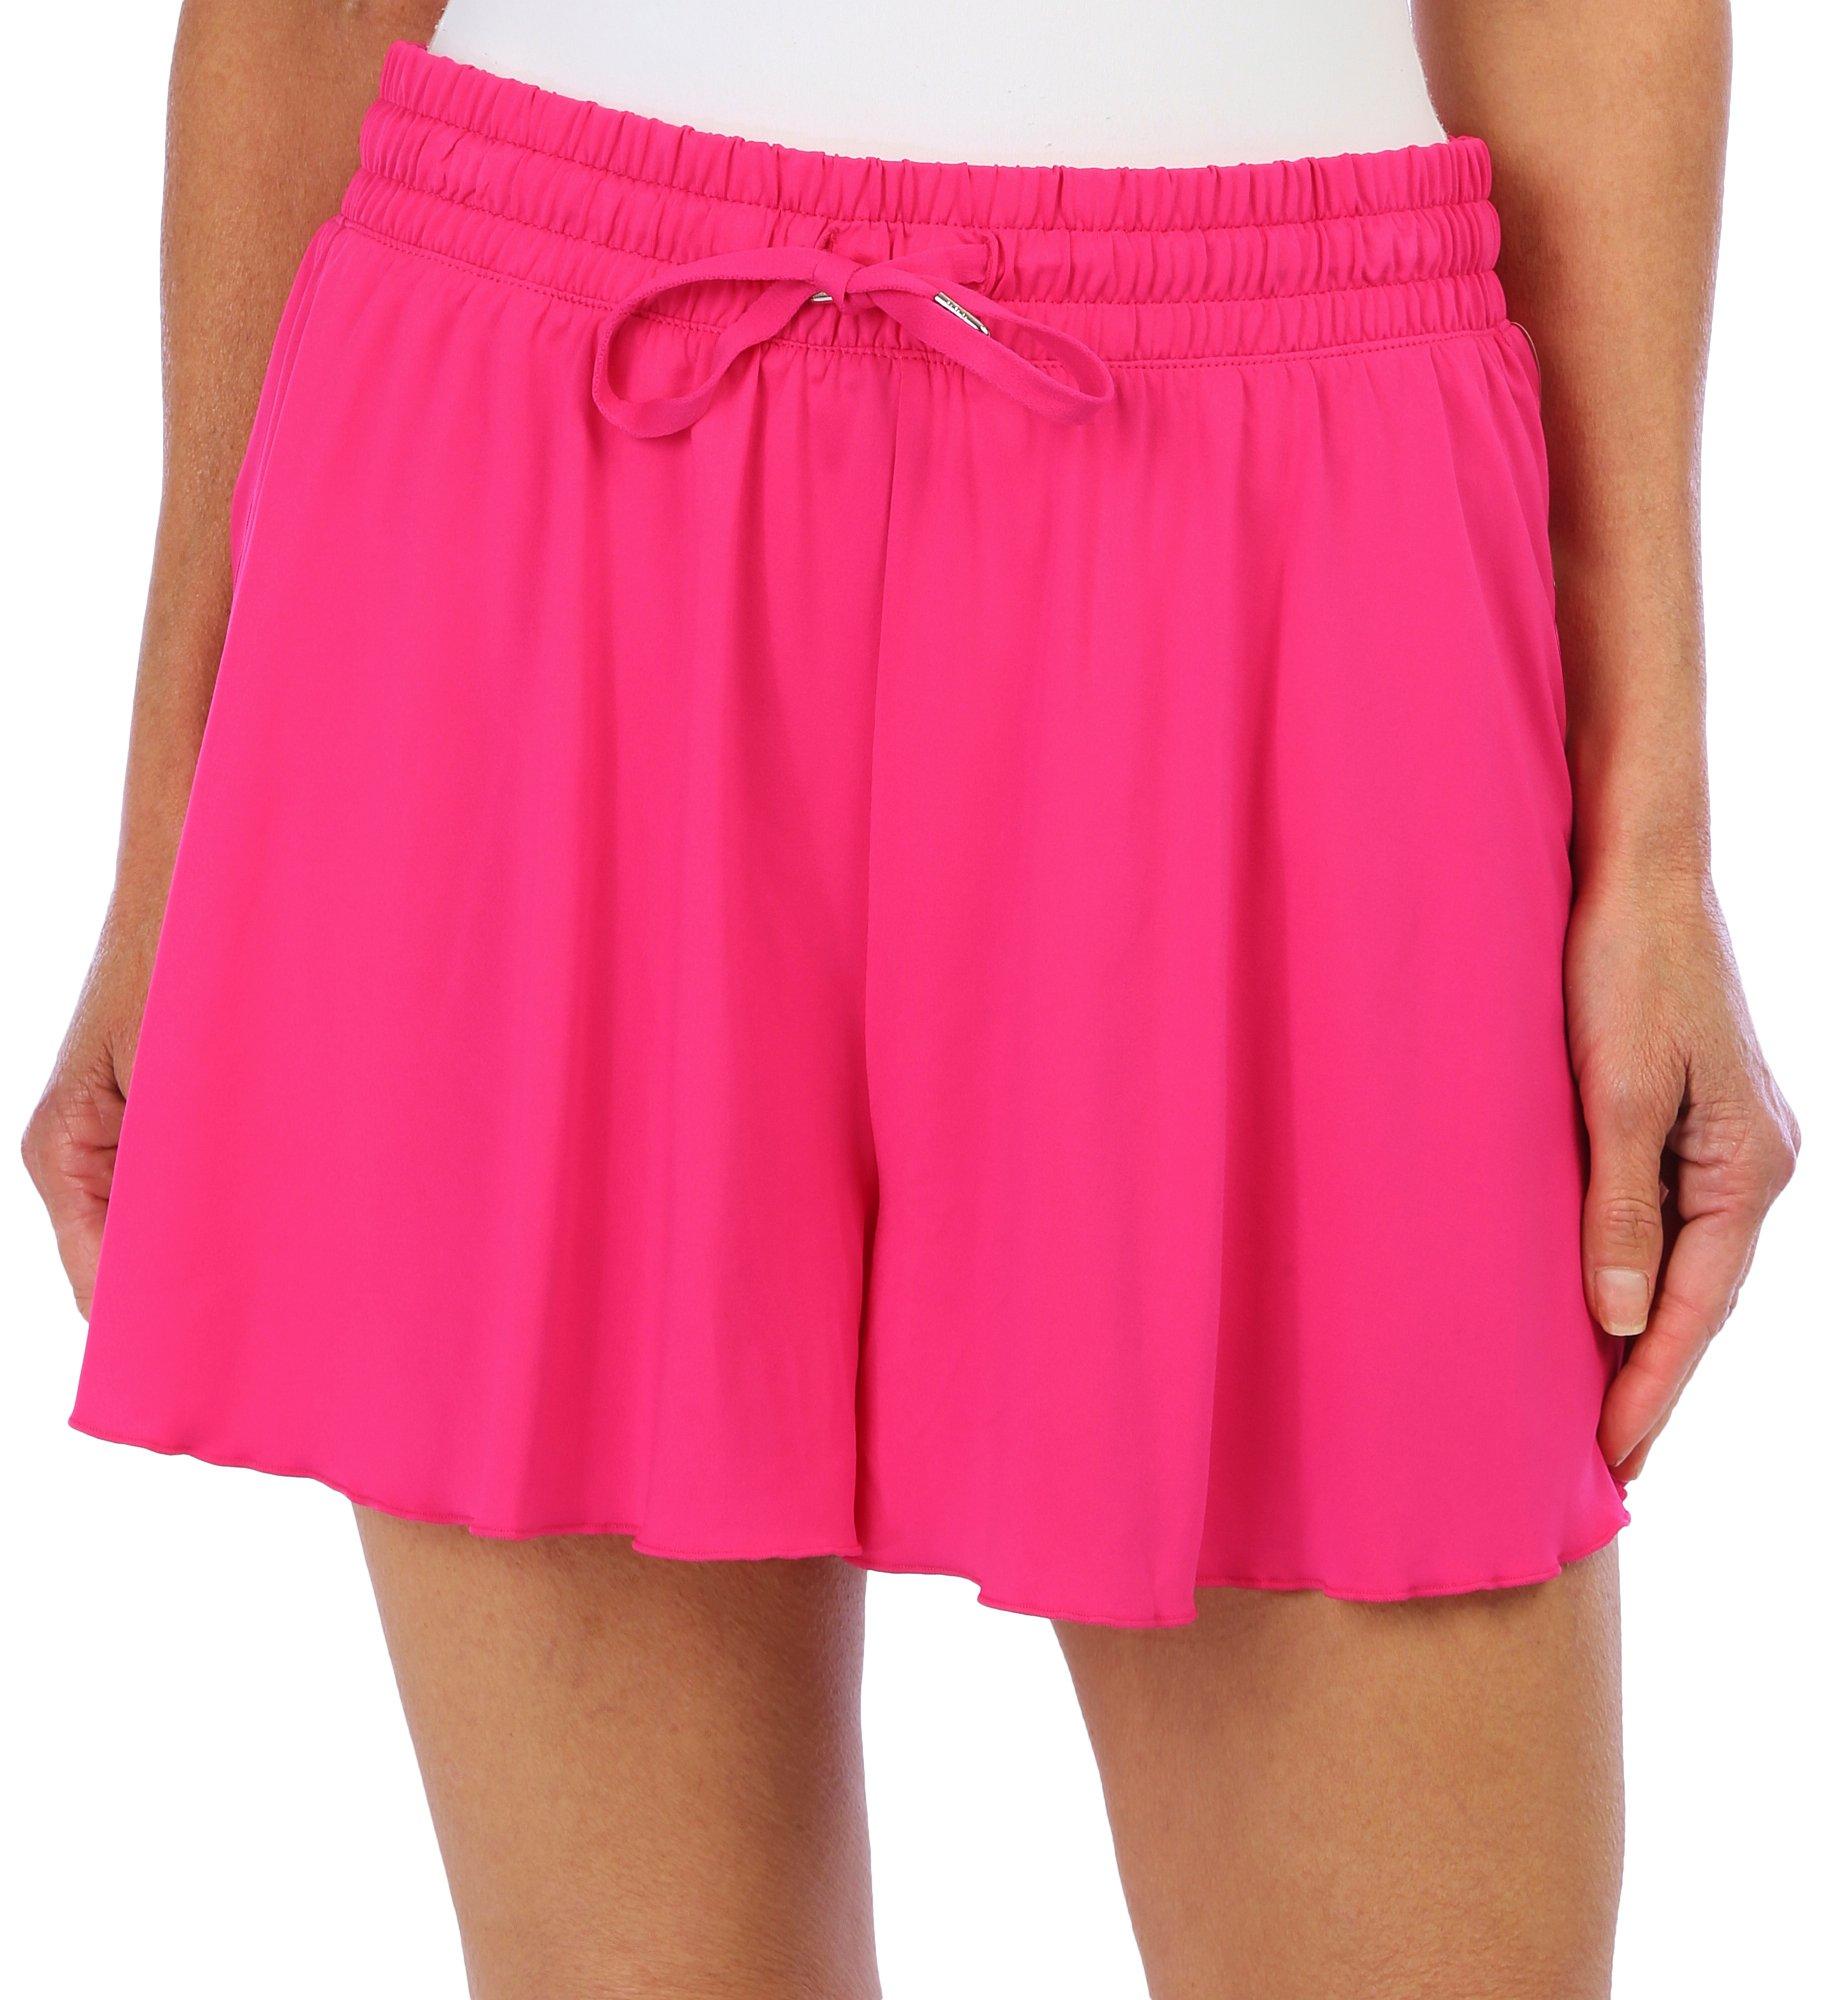 Brisas Womens 4 in. Solid Knit Shorts